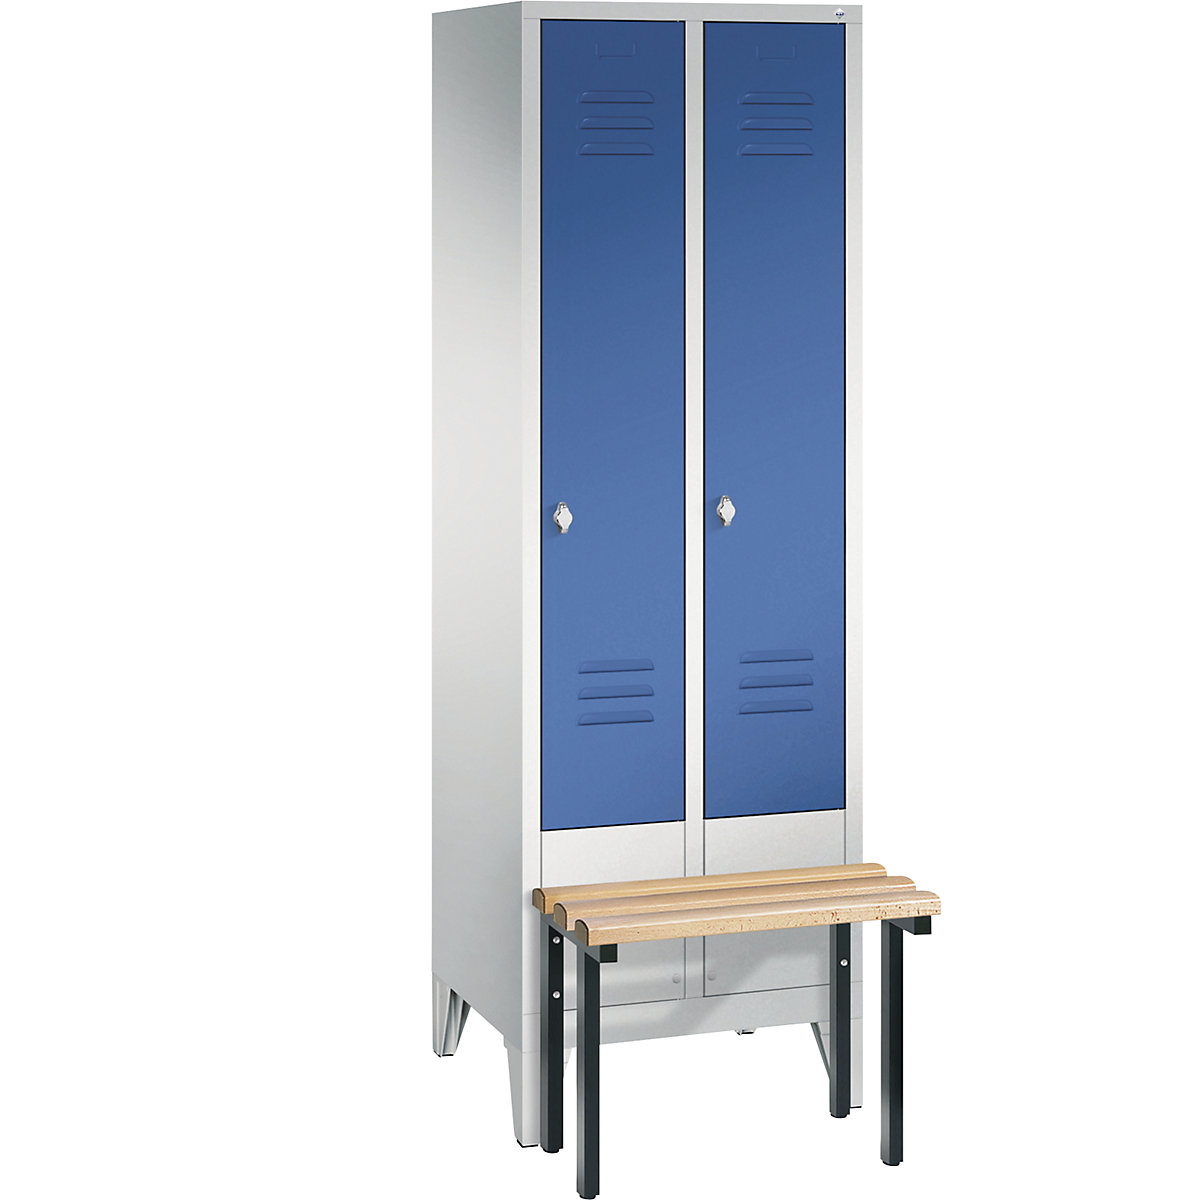 CLASSIC cloakroom locker with bench mounted in front – C+P, 2 compartments, compartment width 300 mm, light grey / gentian blue-5